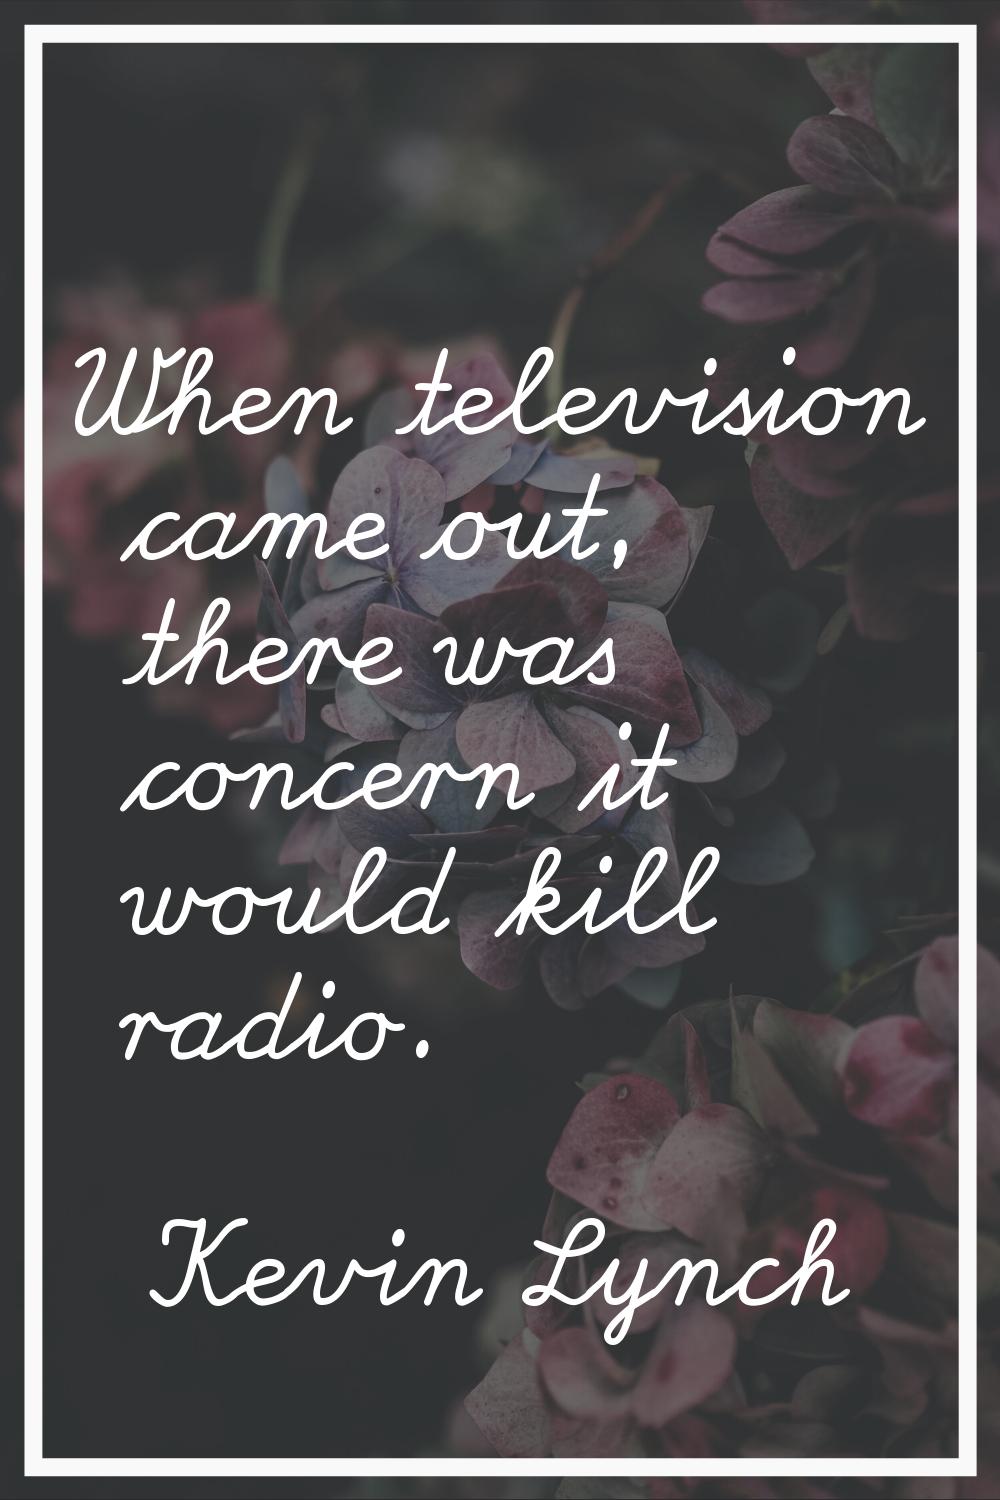 When television came out, there was concern it would kill radio.